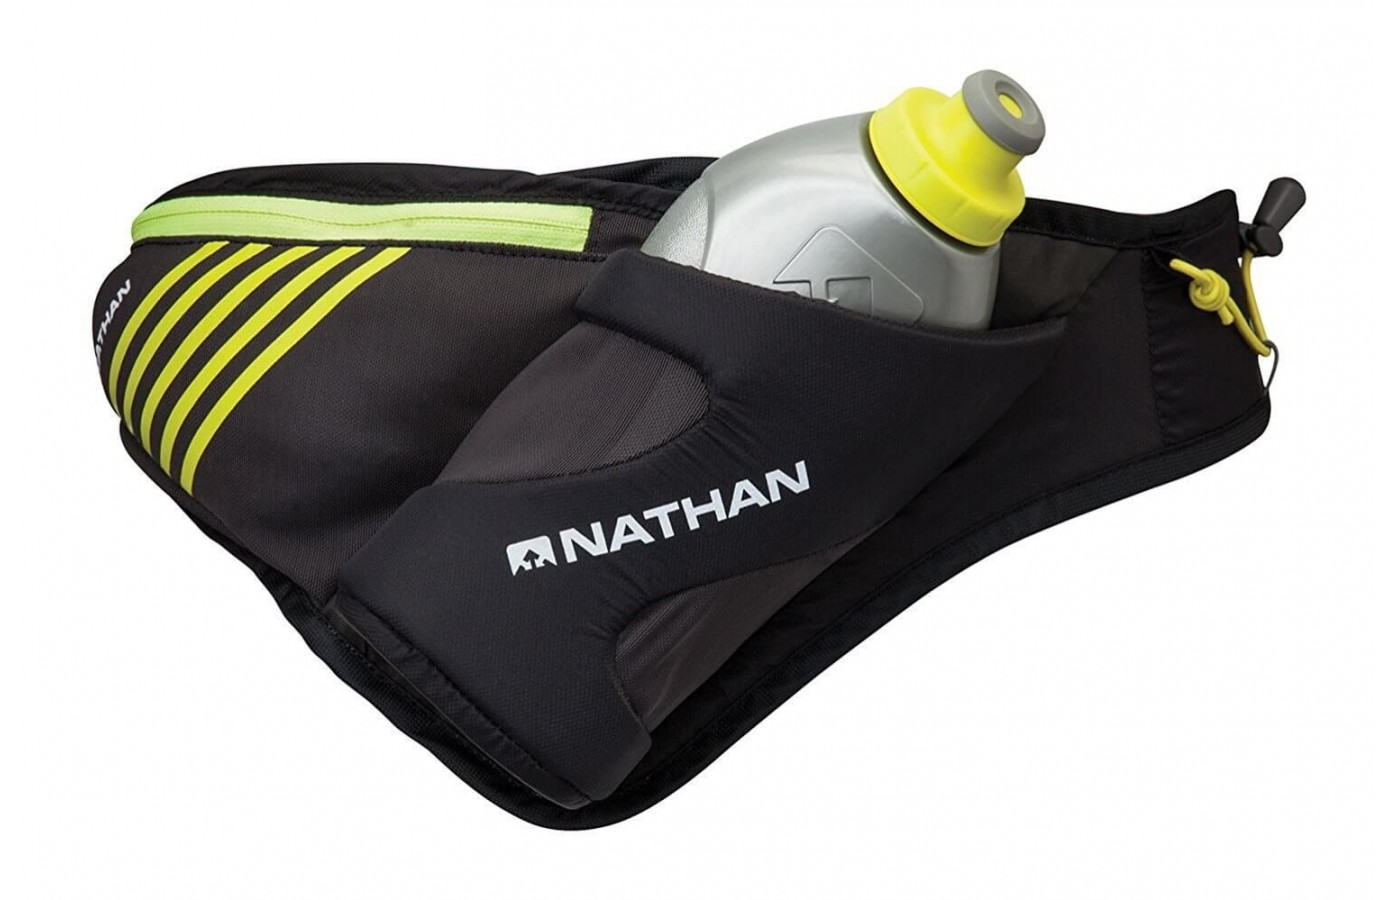 Nathan Peak Waist Pack is a great option for easy access hydration on the run.